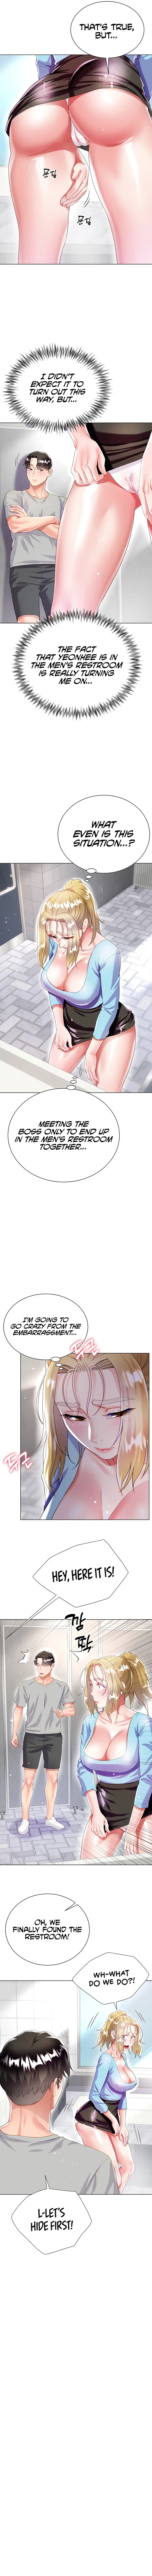 my-sister-in-laws-skirt-chap-33-9